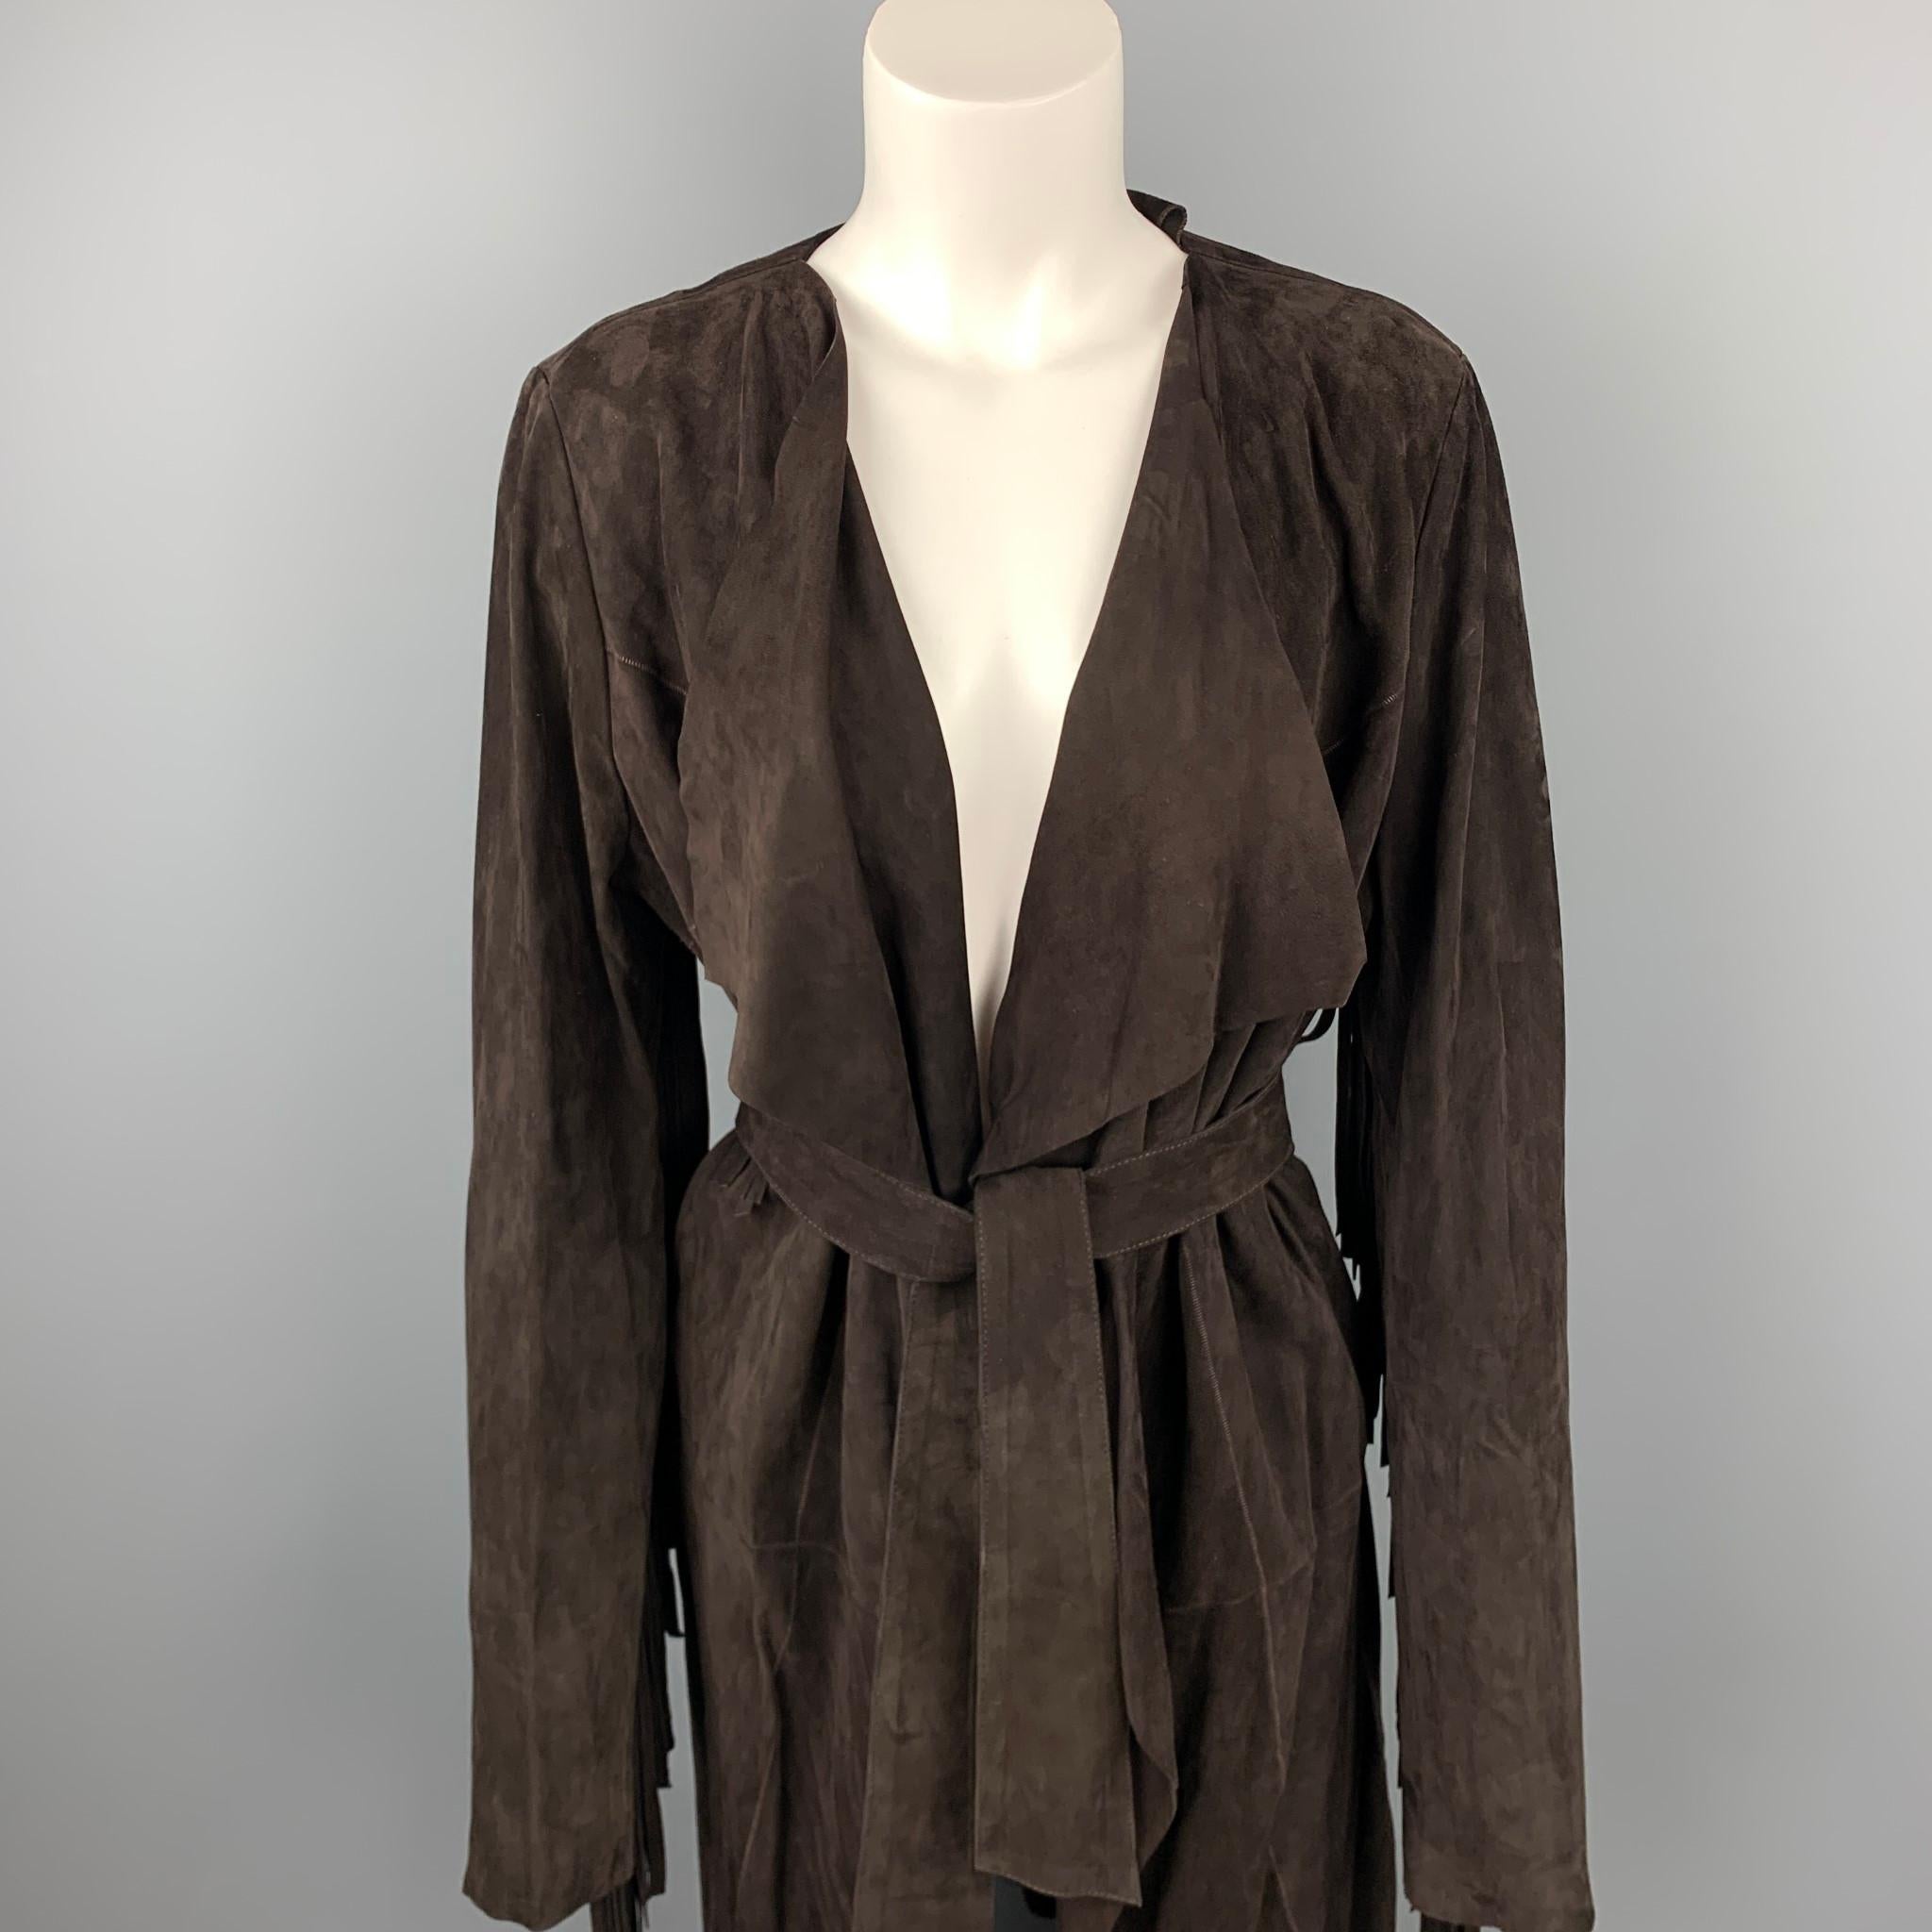 VINTAGE coat comes in a brown suede with a fringe trim featuring a open front and a belted style.

Good Pre-Owned Condition.
Marked: No tag 

Measurements:

Shoulder: 16 in. 
Bust: 40 in. 
Sleeve: 28 in. 
Length: 38.5 in. 